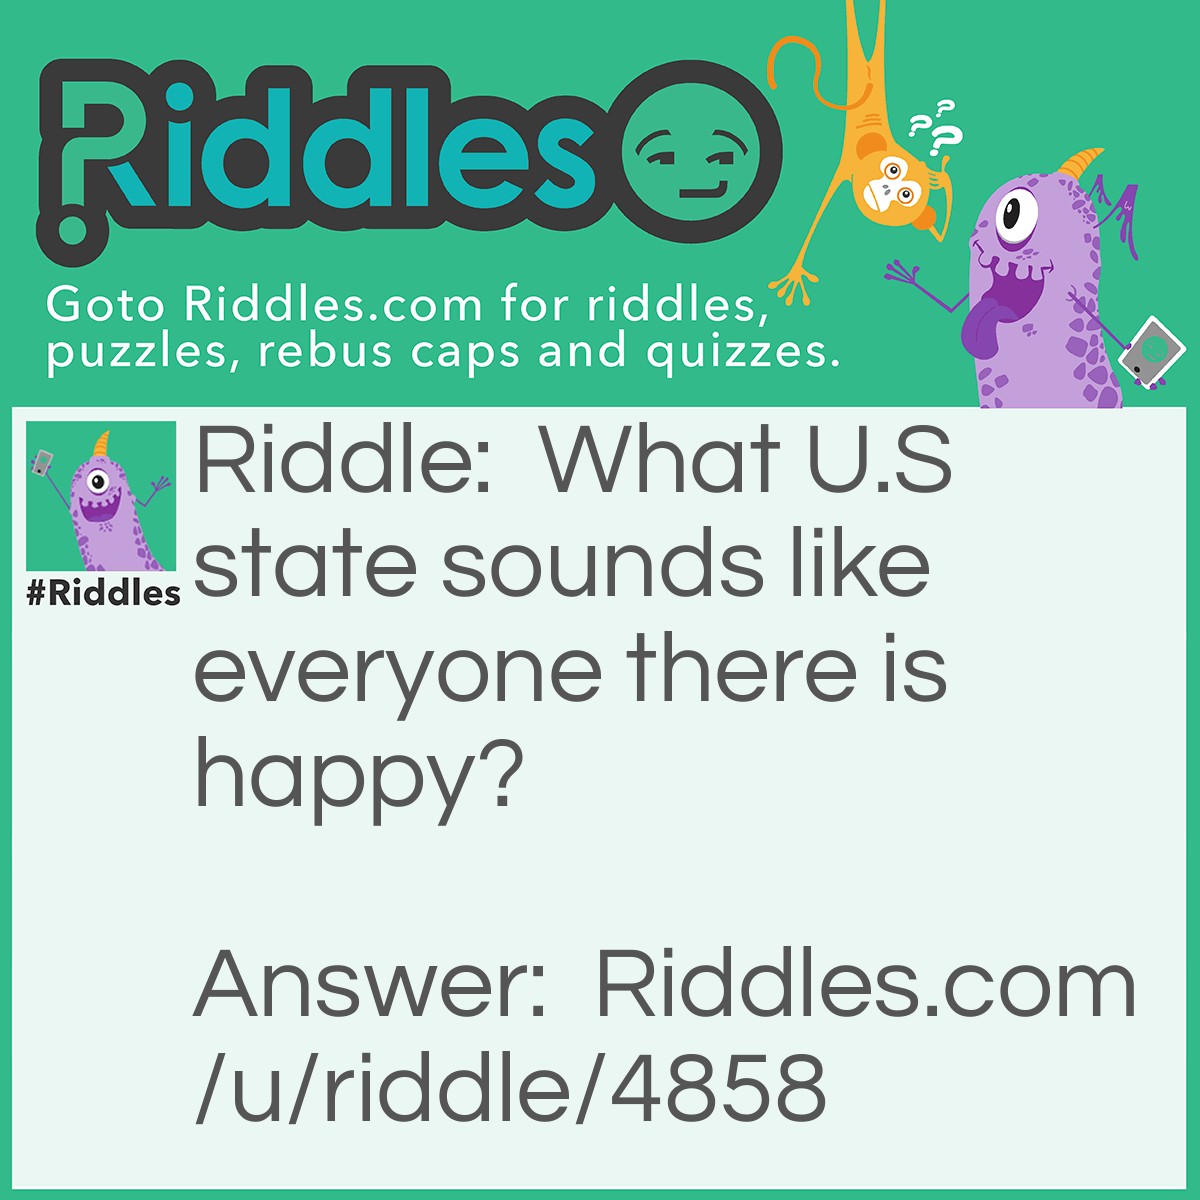 Riddle: What U.S state sounds like everyone there is happy? Answer: Maryland.